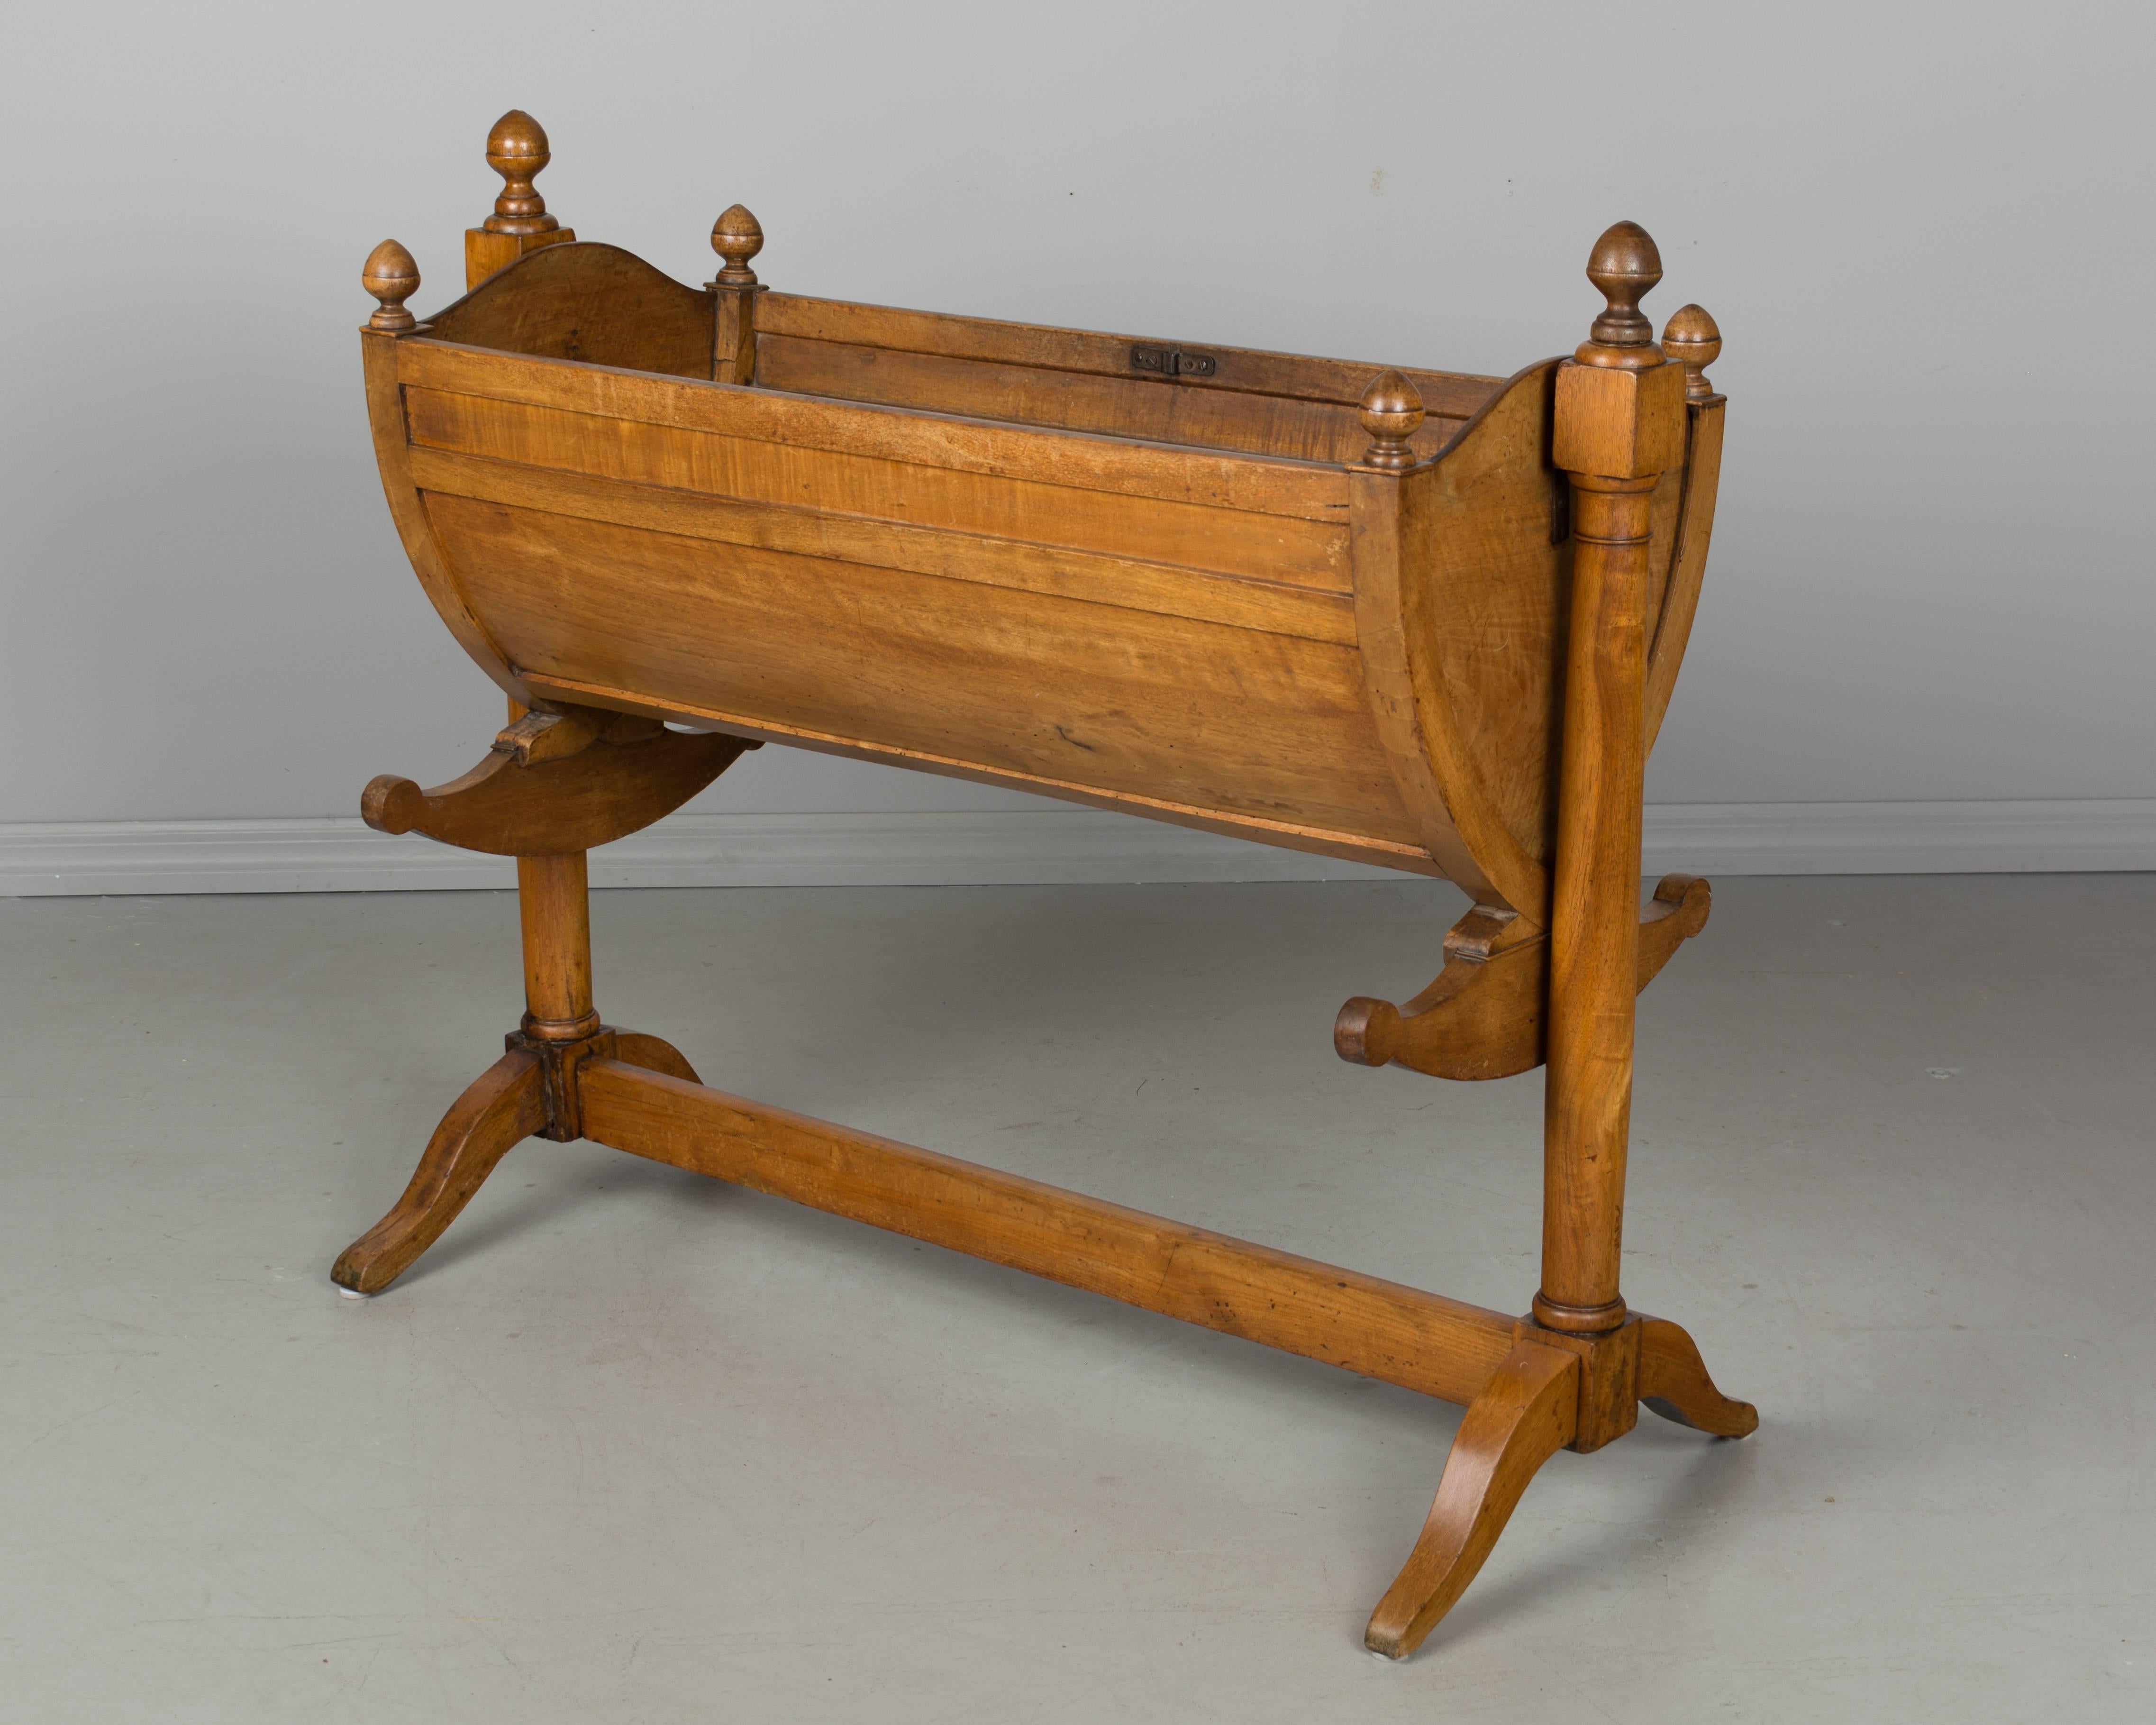 A 19th century French Empire style baby cradle that has been converted to a planter with a newer removable zinc trough. The stand is sturdy and the cradle rocks, but the bottom plank of the bed has been removed. Made of solid walnut with turned